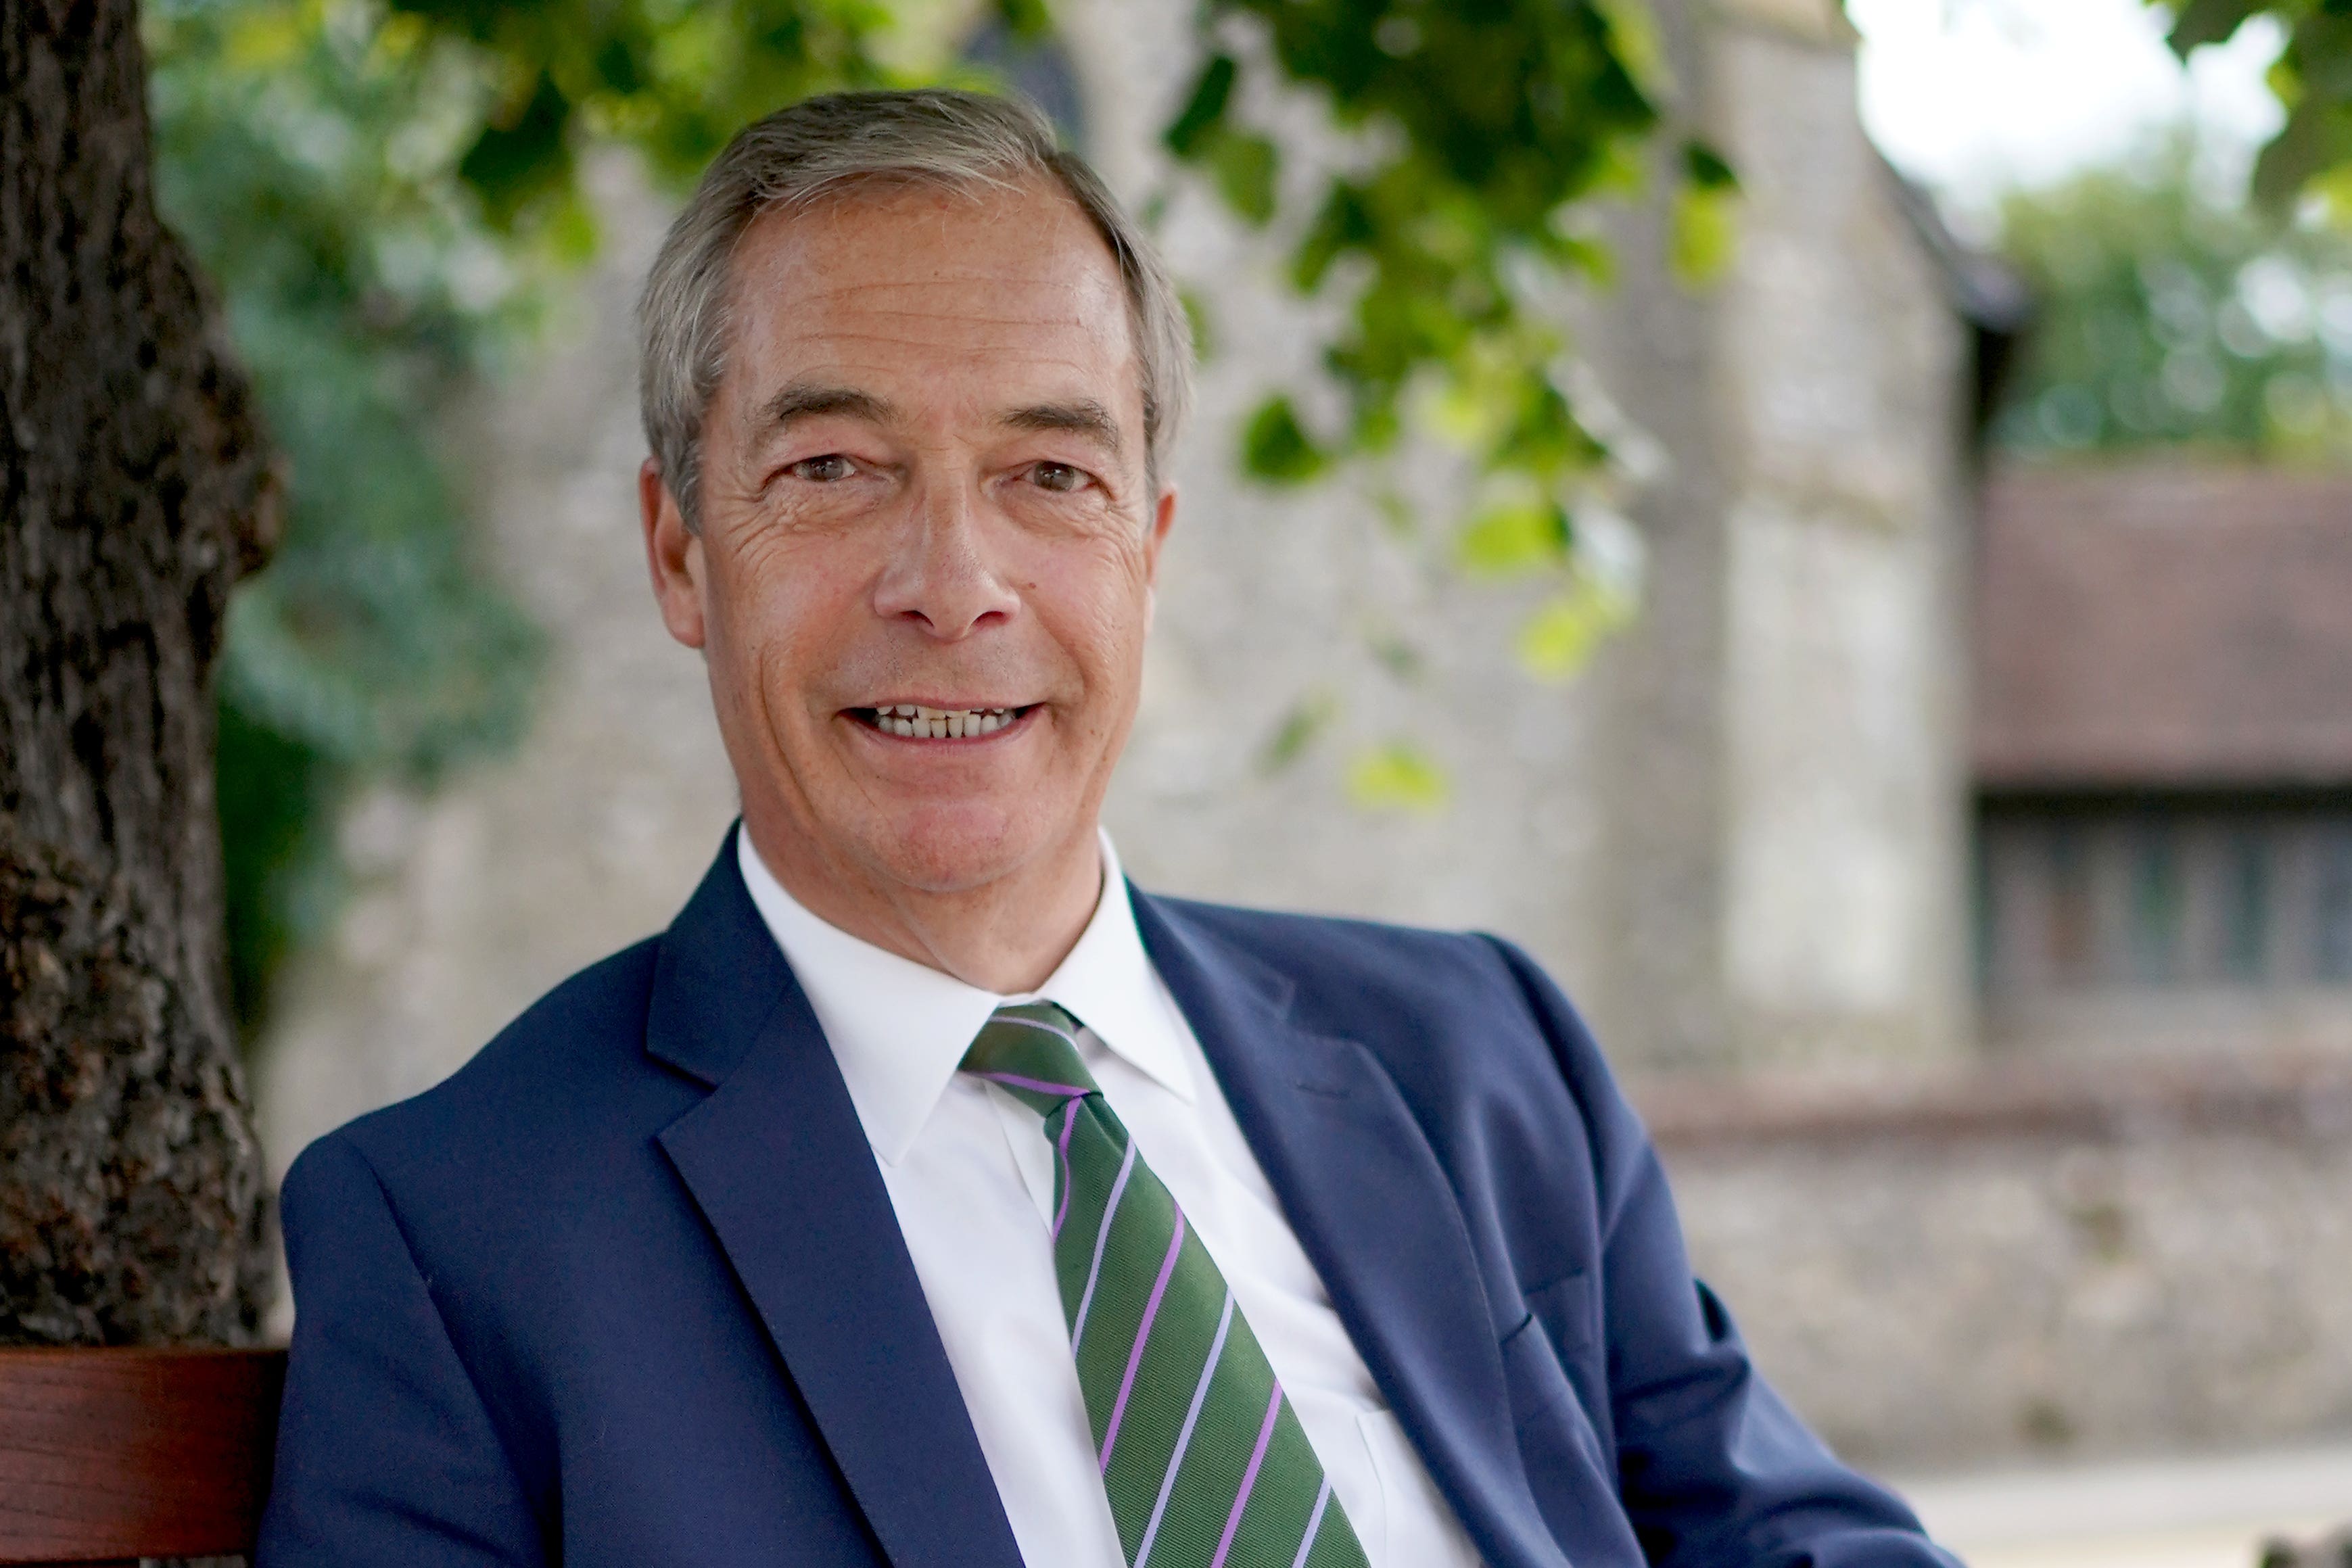 Nigel Farage says don’t feel too sorry for Dame Alison